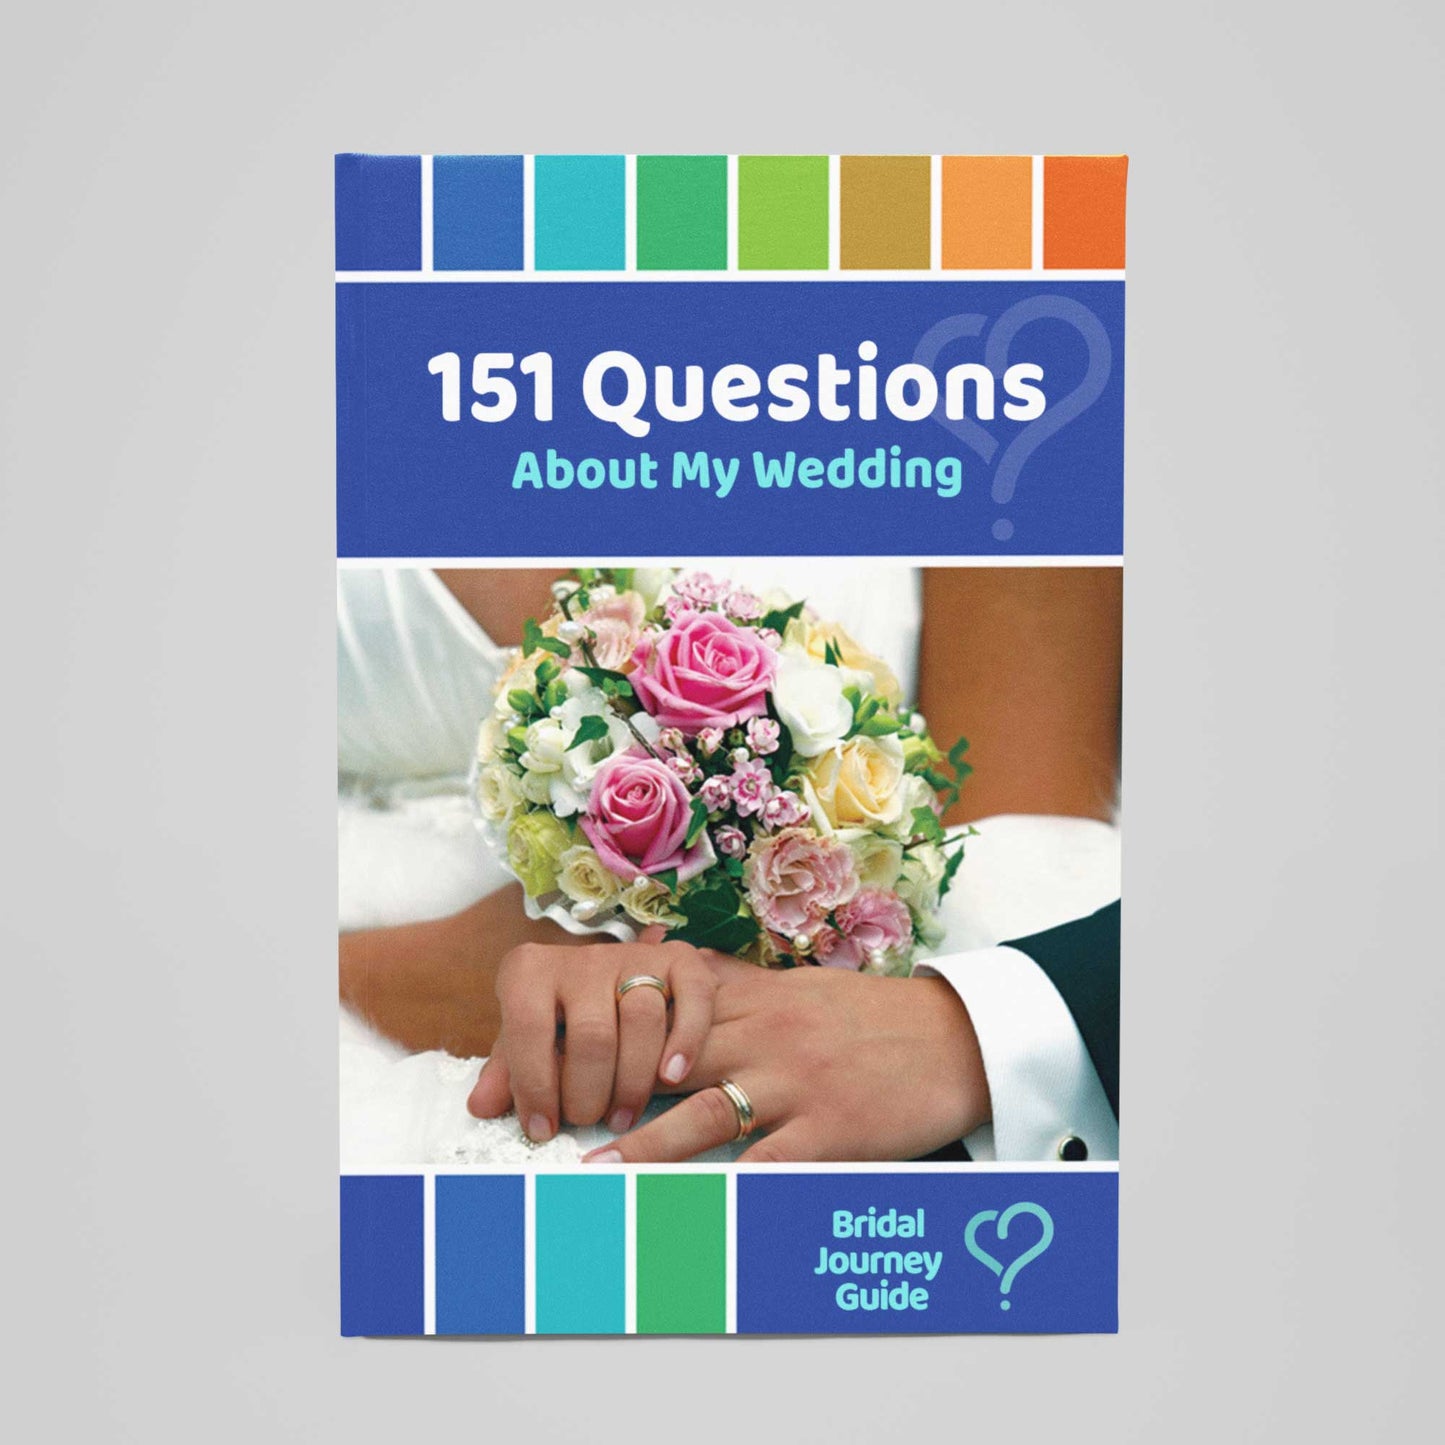 151 Questions About My Wedding